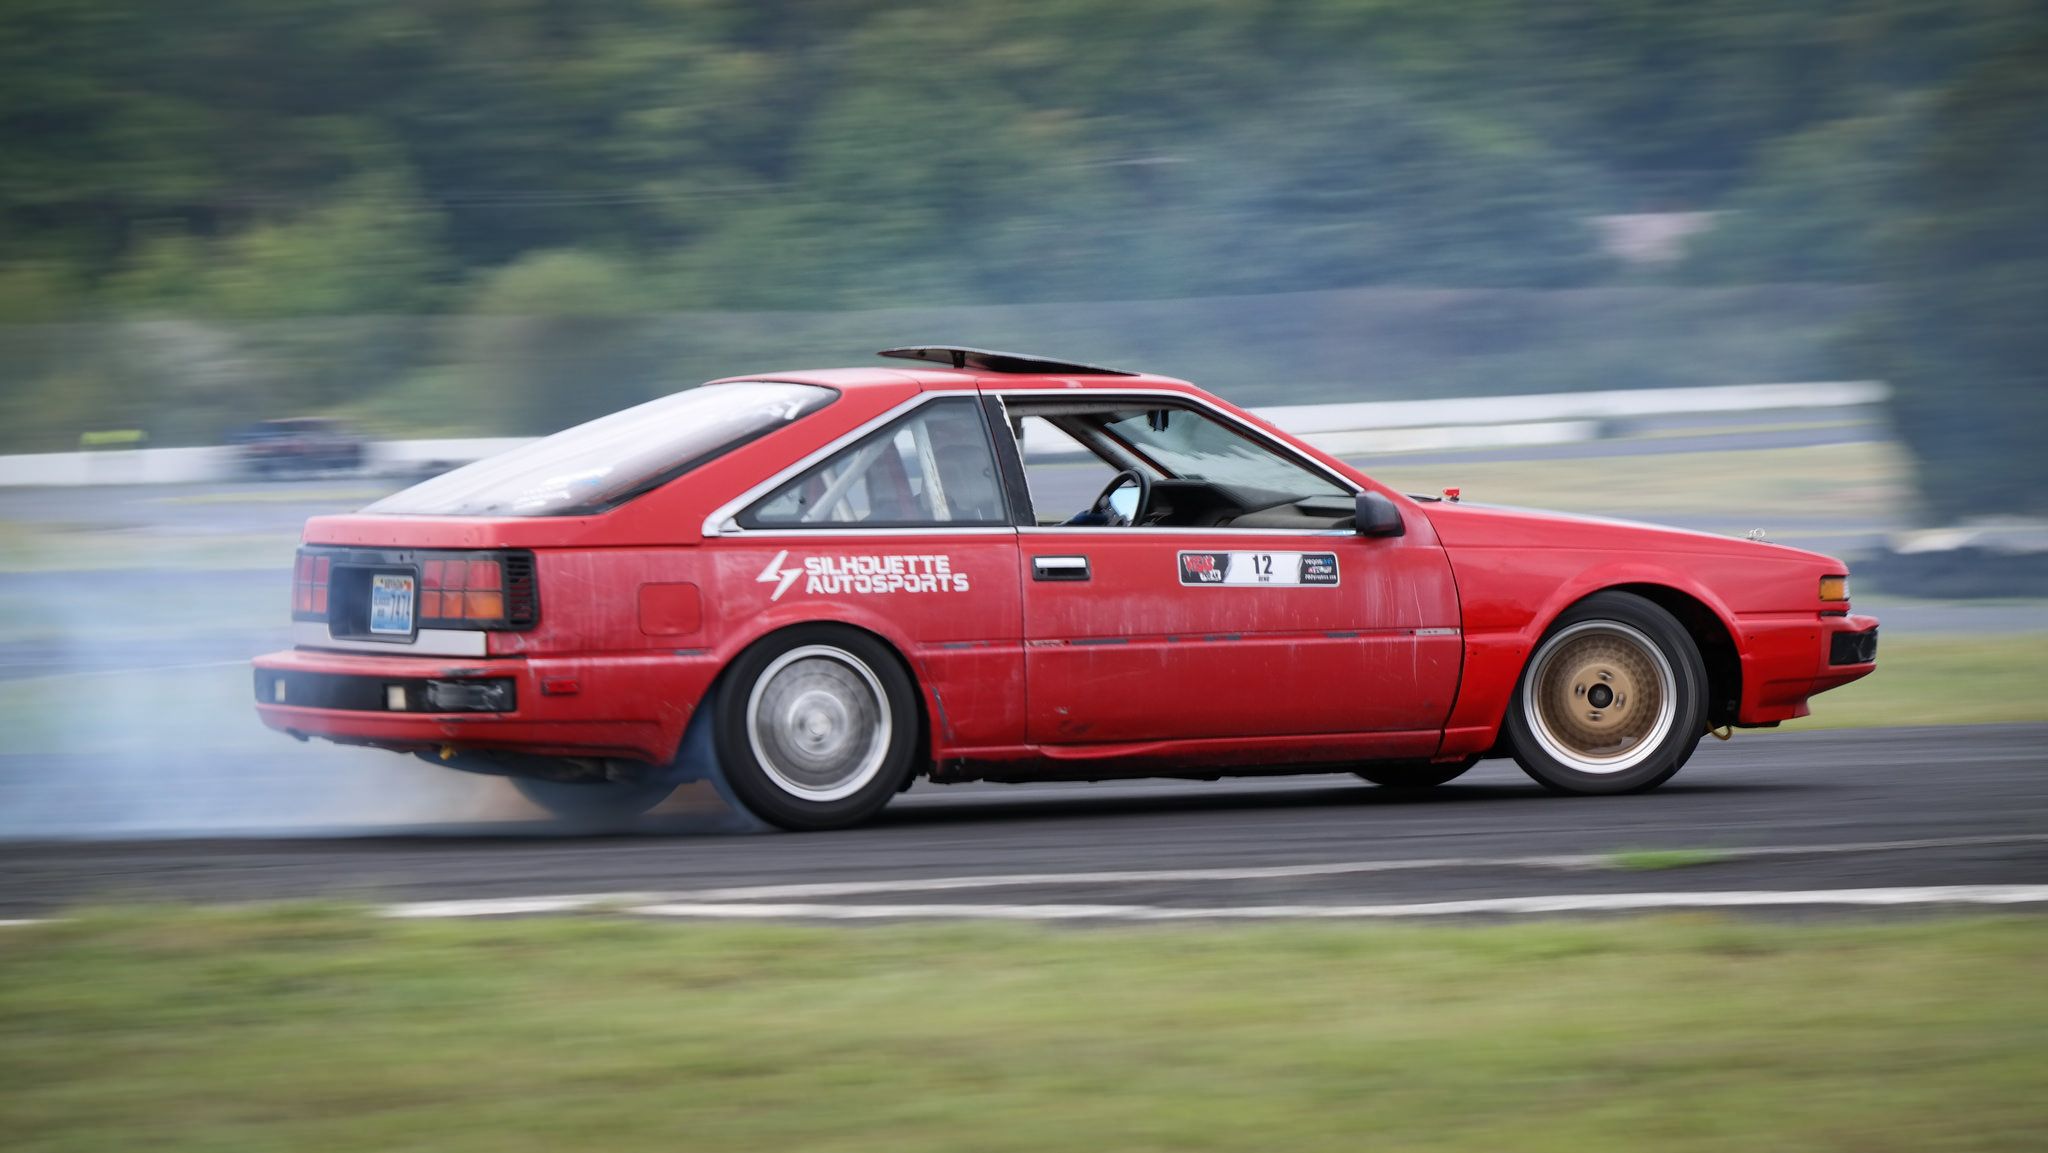 The 10 Best Drift Car In Real Life